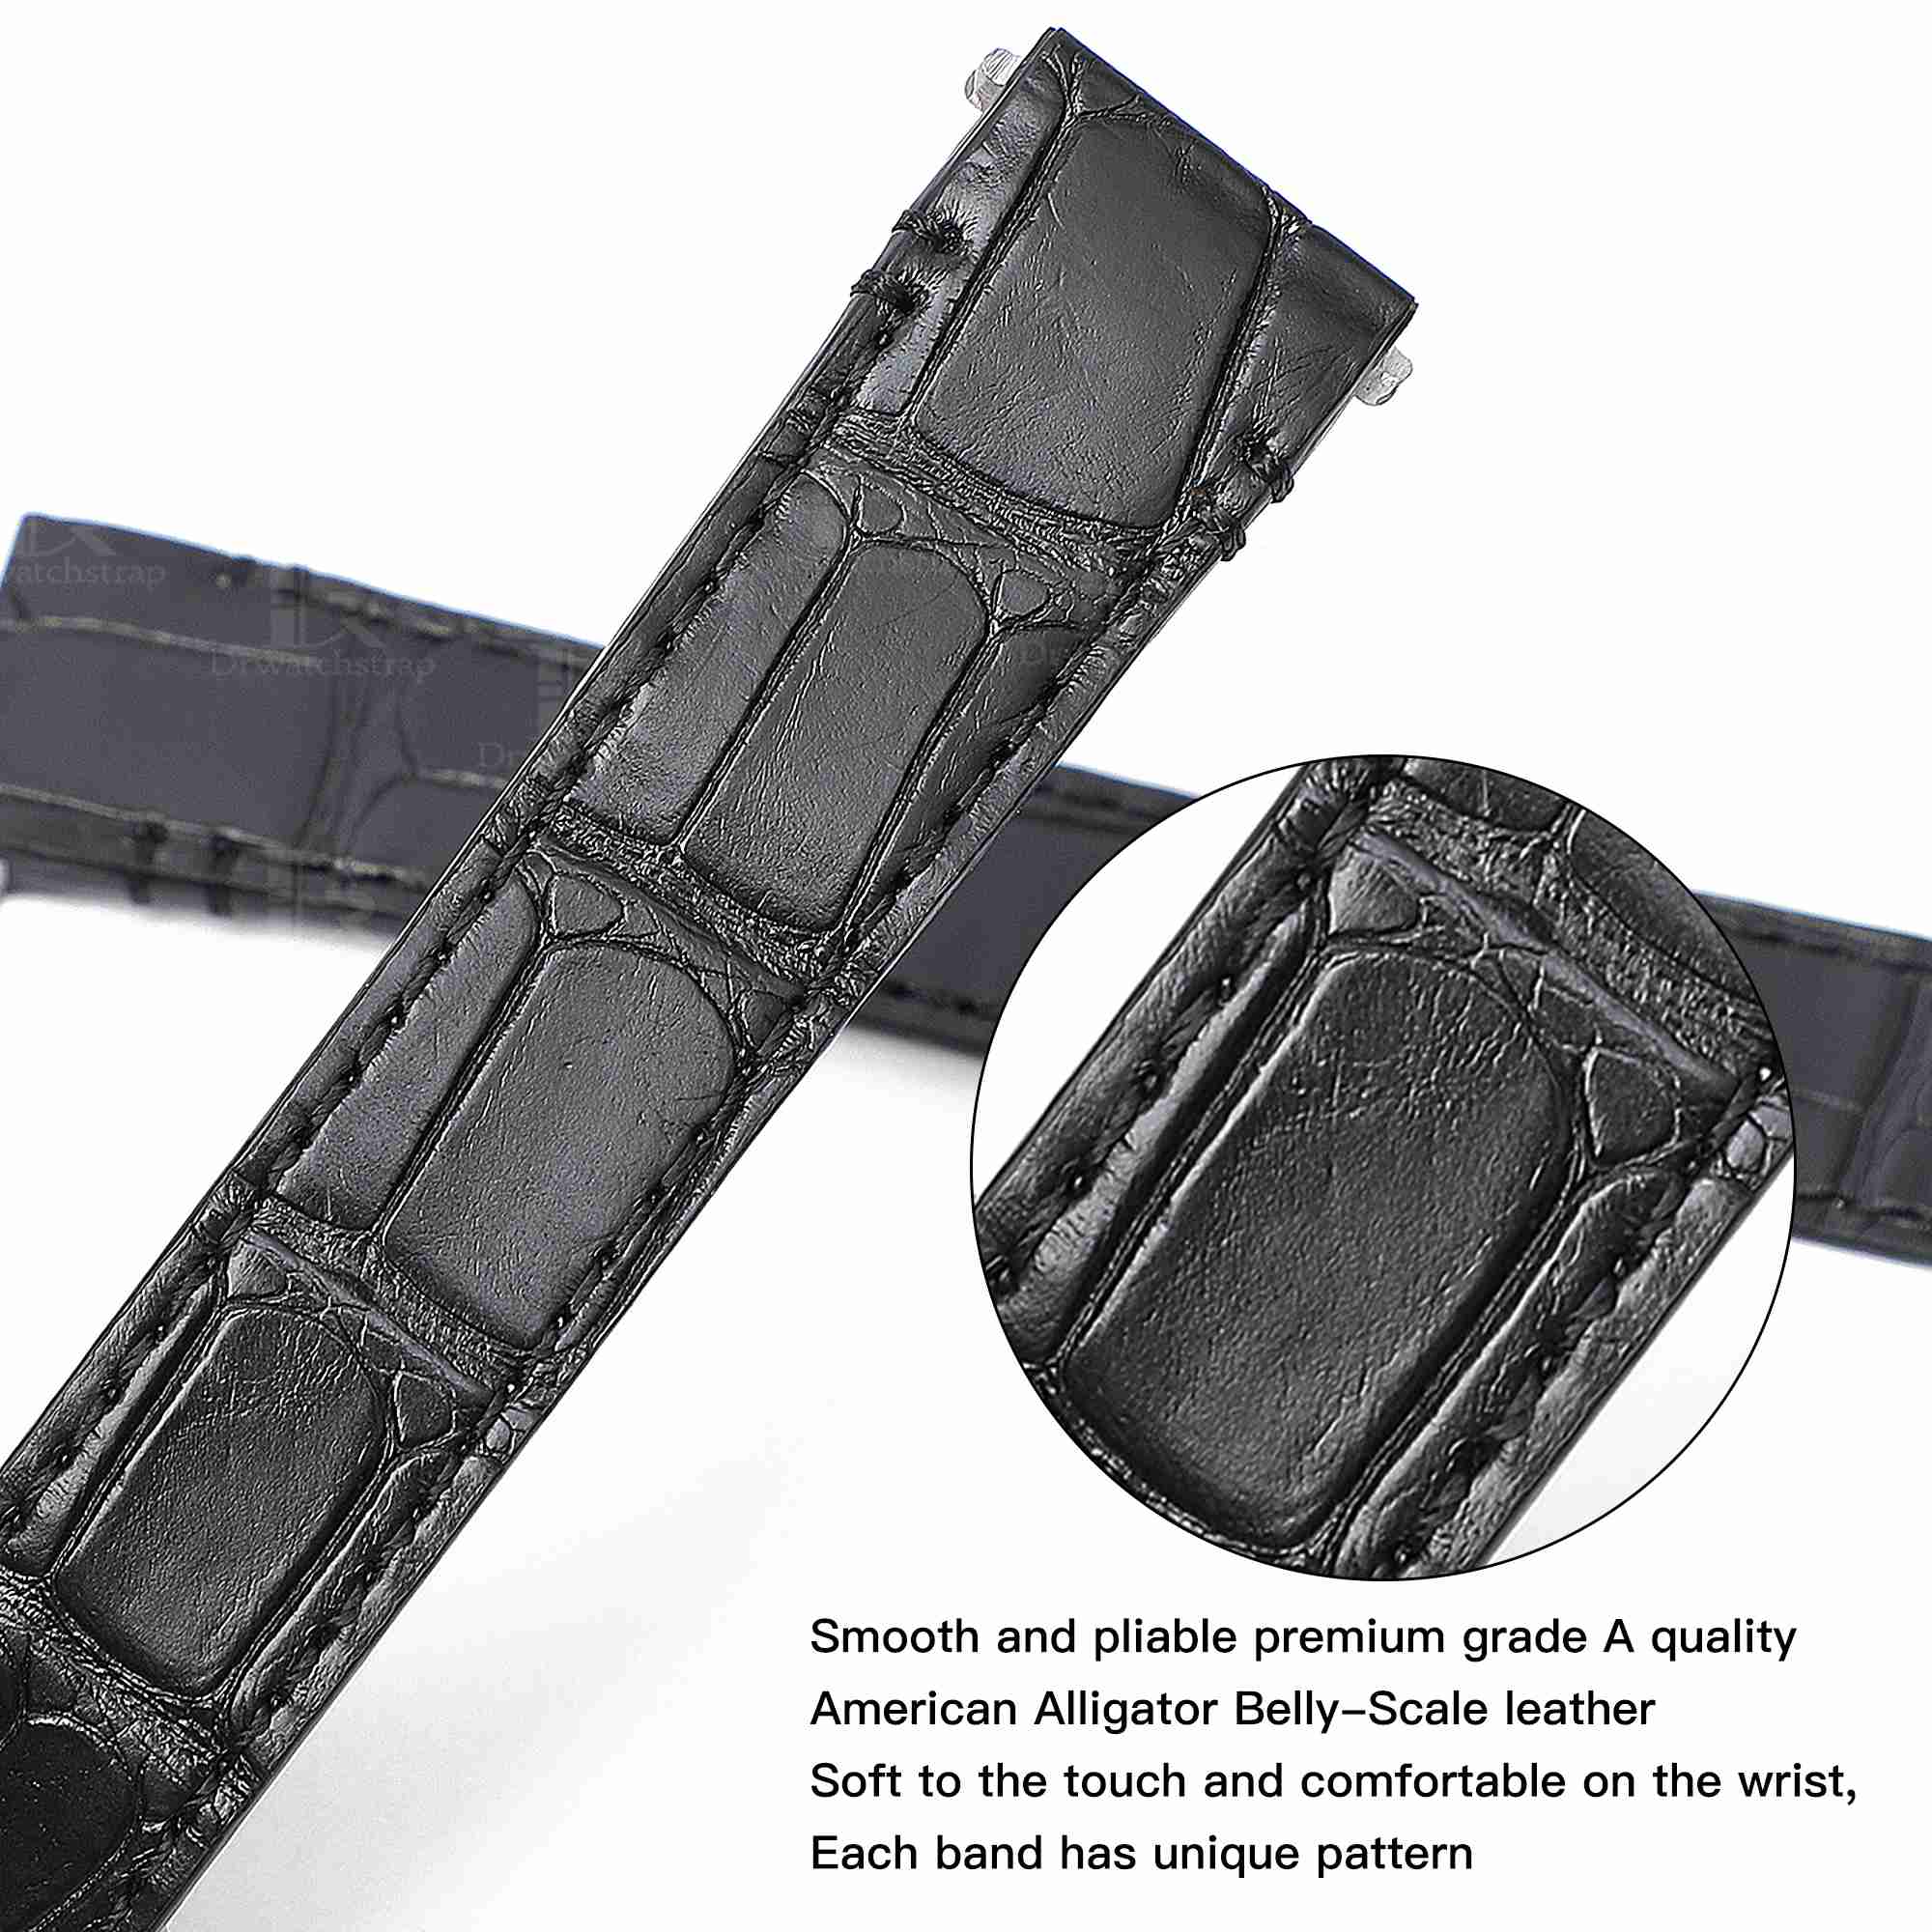 Genuine best quality replacement Grade American Alligator Quickswitch Black leather Cartier Santos watch straps & watchbands for Cartier Santos 100 L XL watches for sale - Grade A crocodile custom leather watch band with interchangeable system online at low price